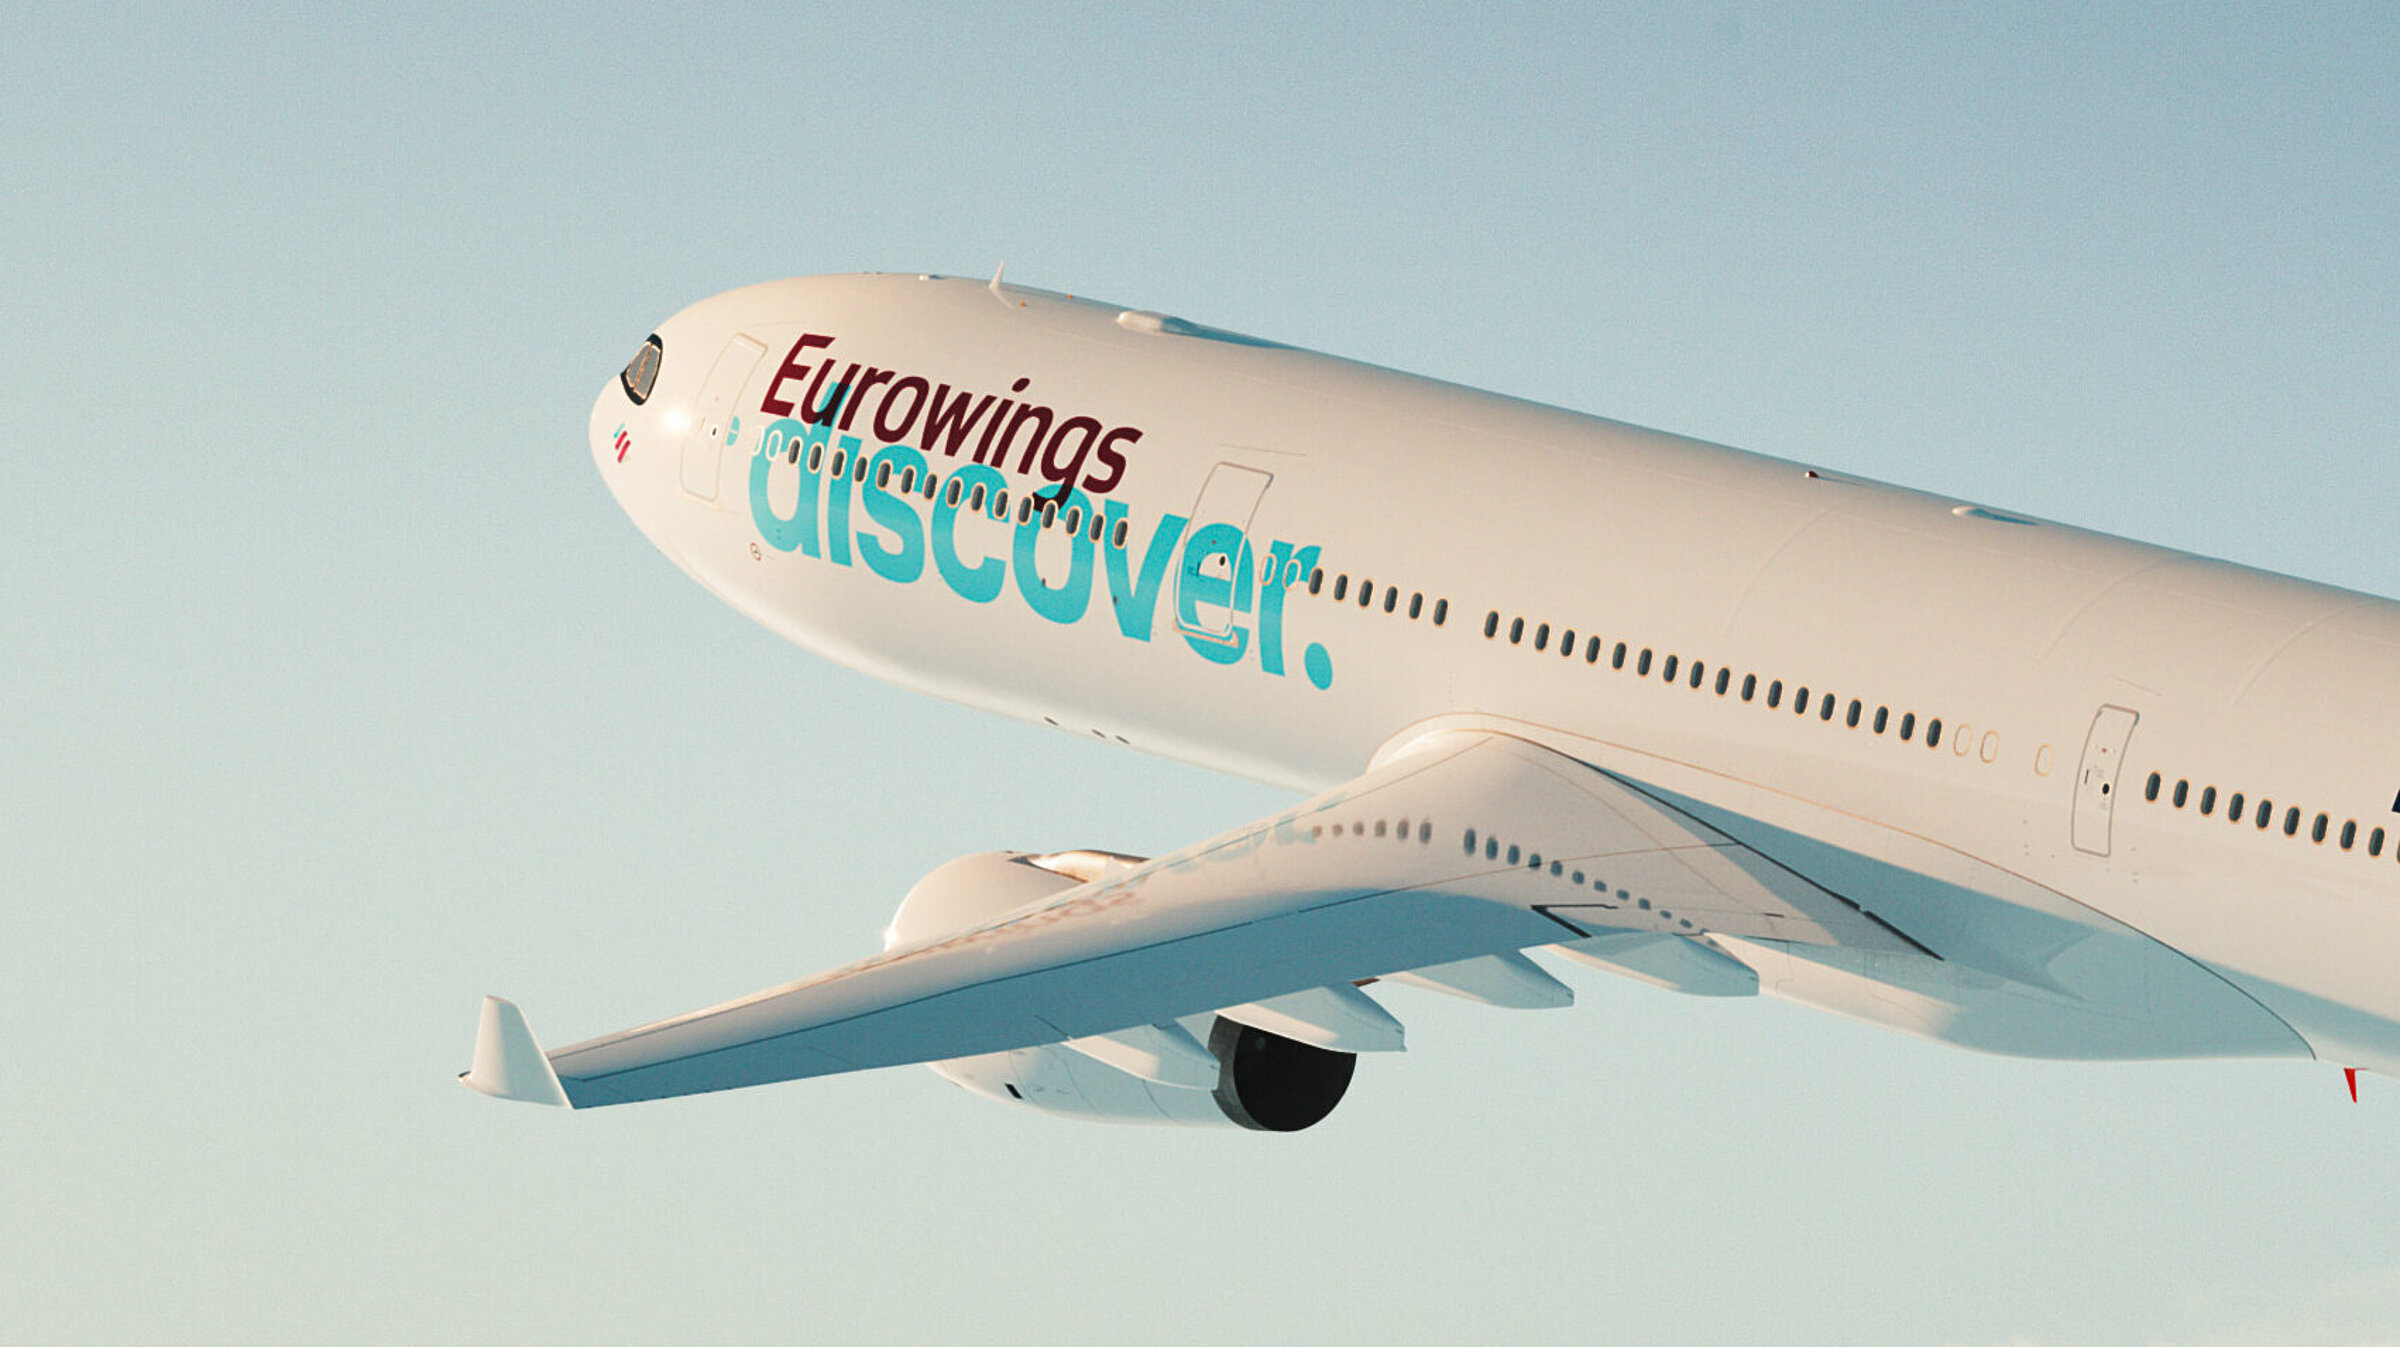 Lufthansa Group Eurowings Discover Tampa